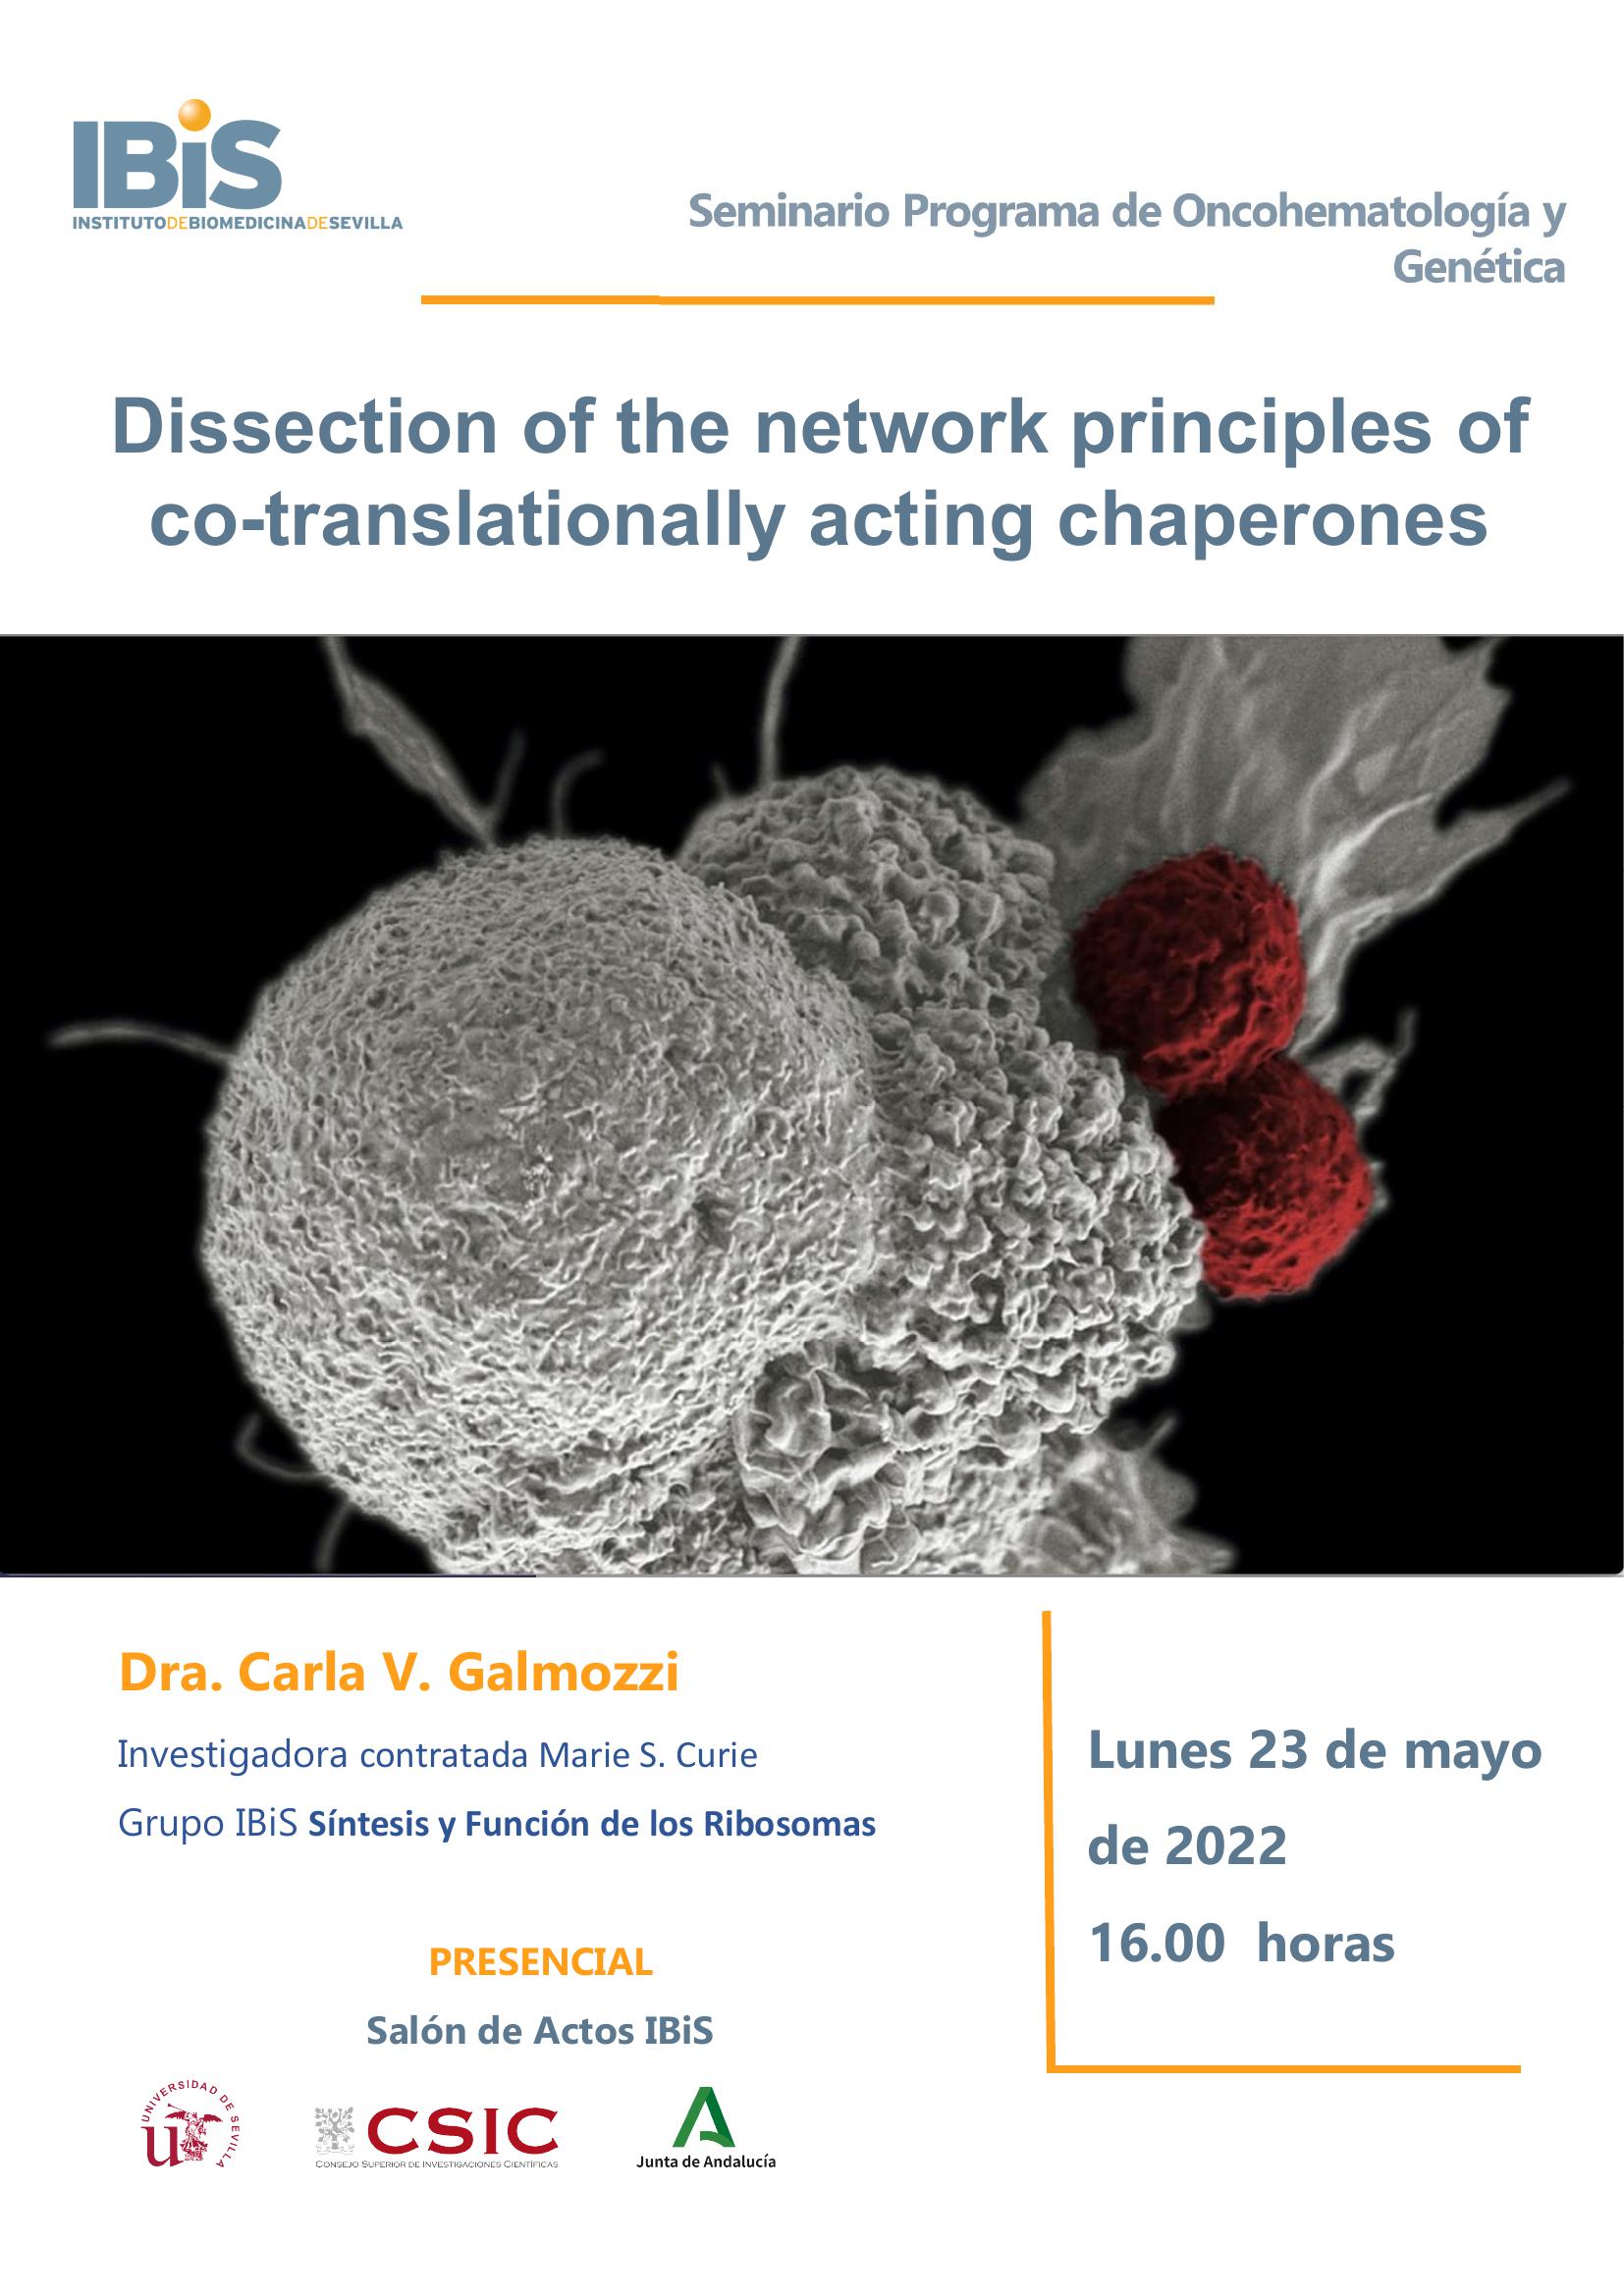 Poster: Dissection of the network principles of co-translationally acting chaperones